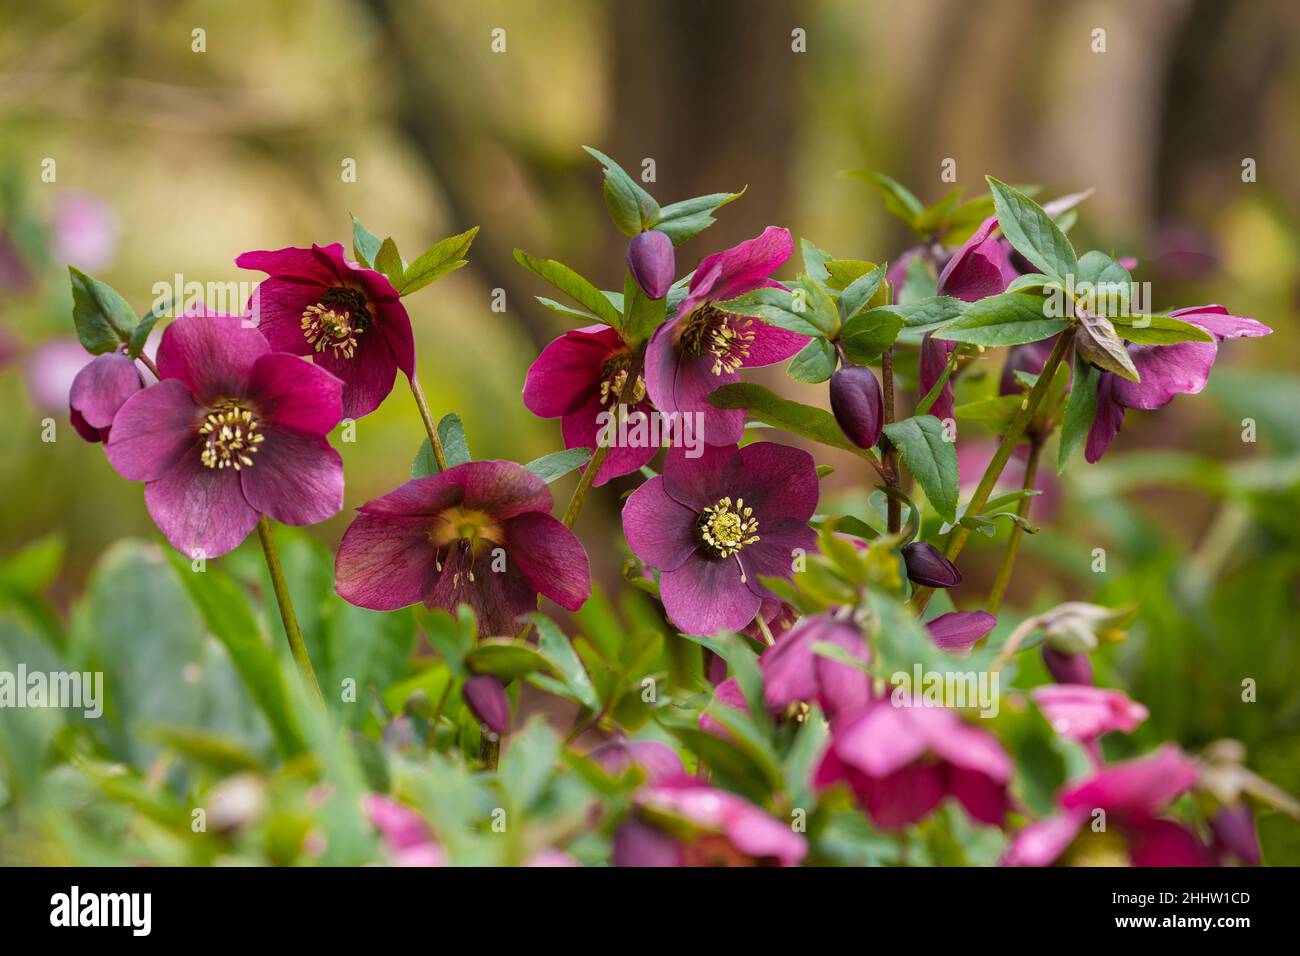 Beautiful, vibrant, purple hellebores in a lush environment Stock Photo